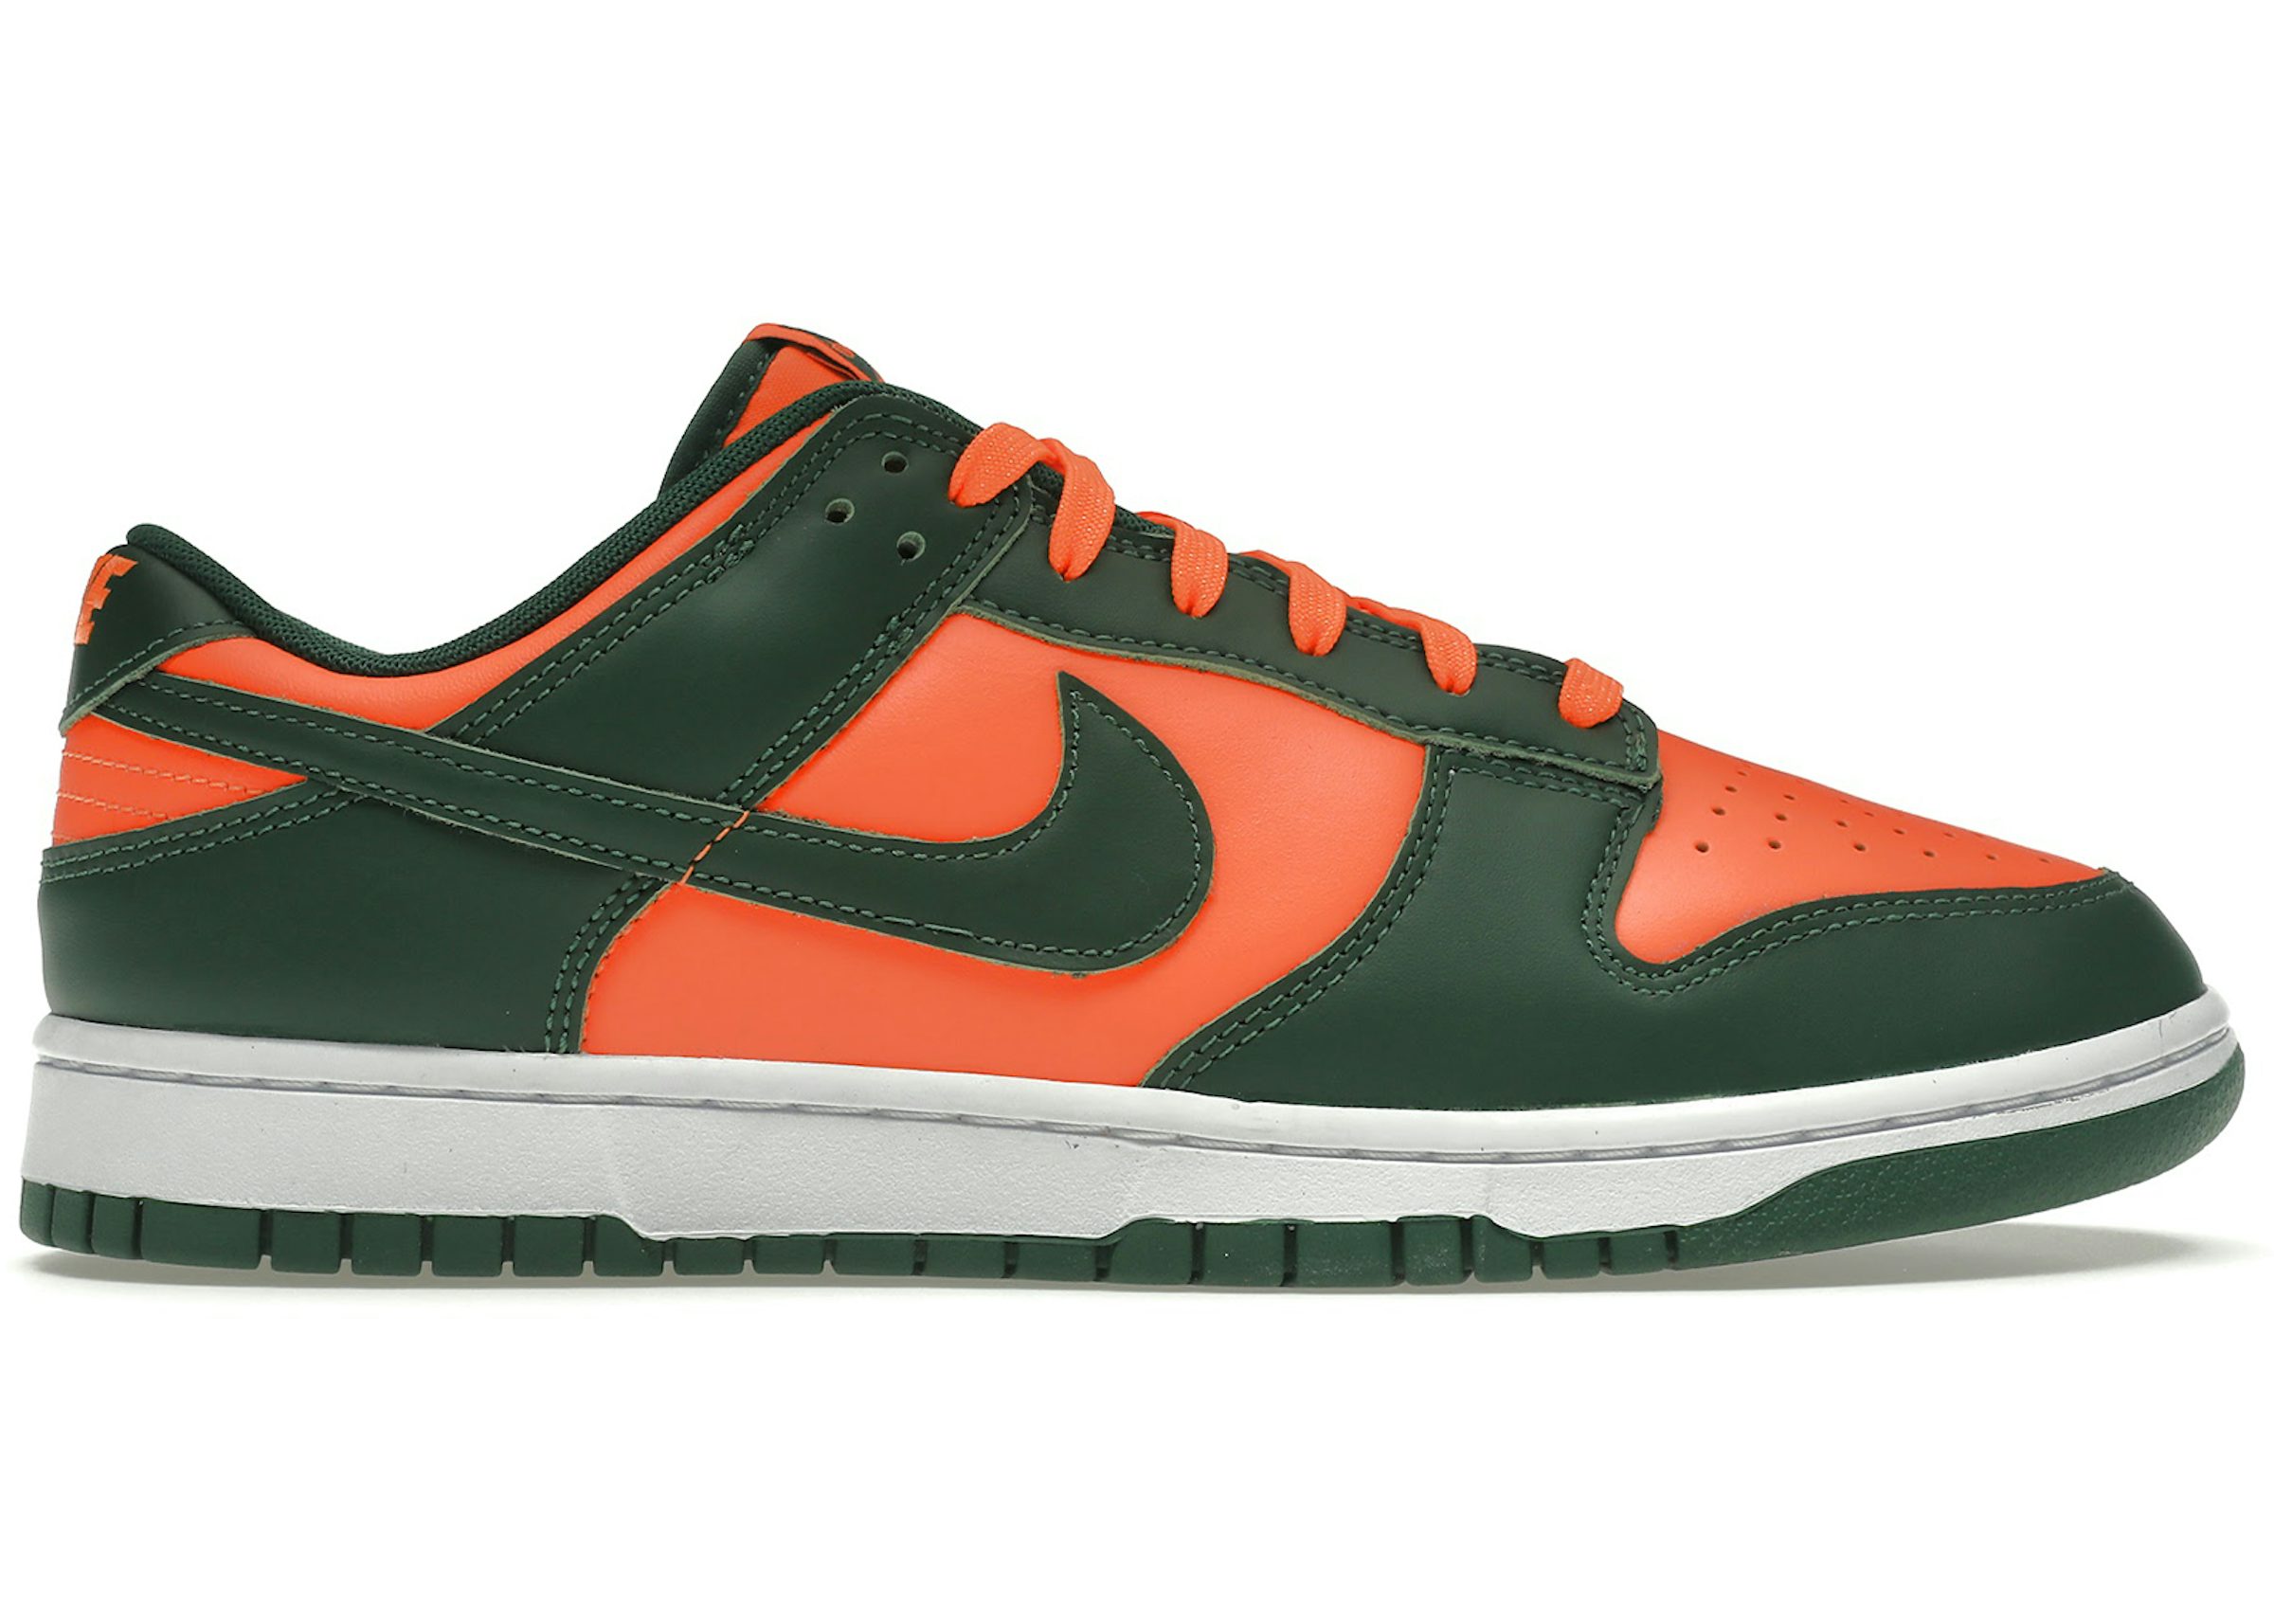 nike dunk miami hurricanes outfit